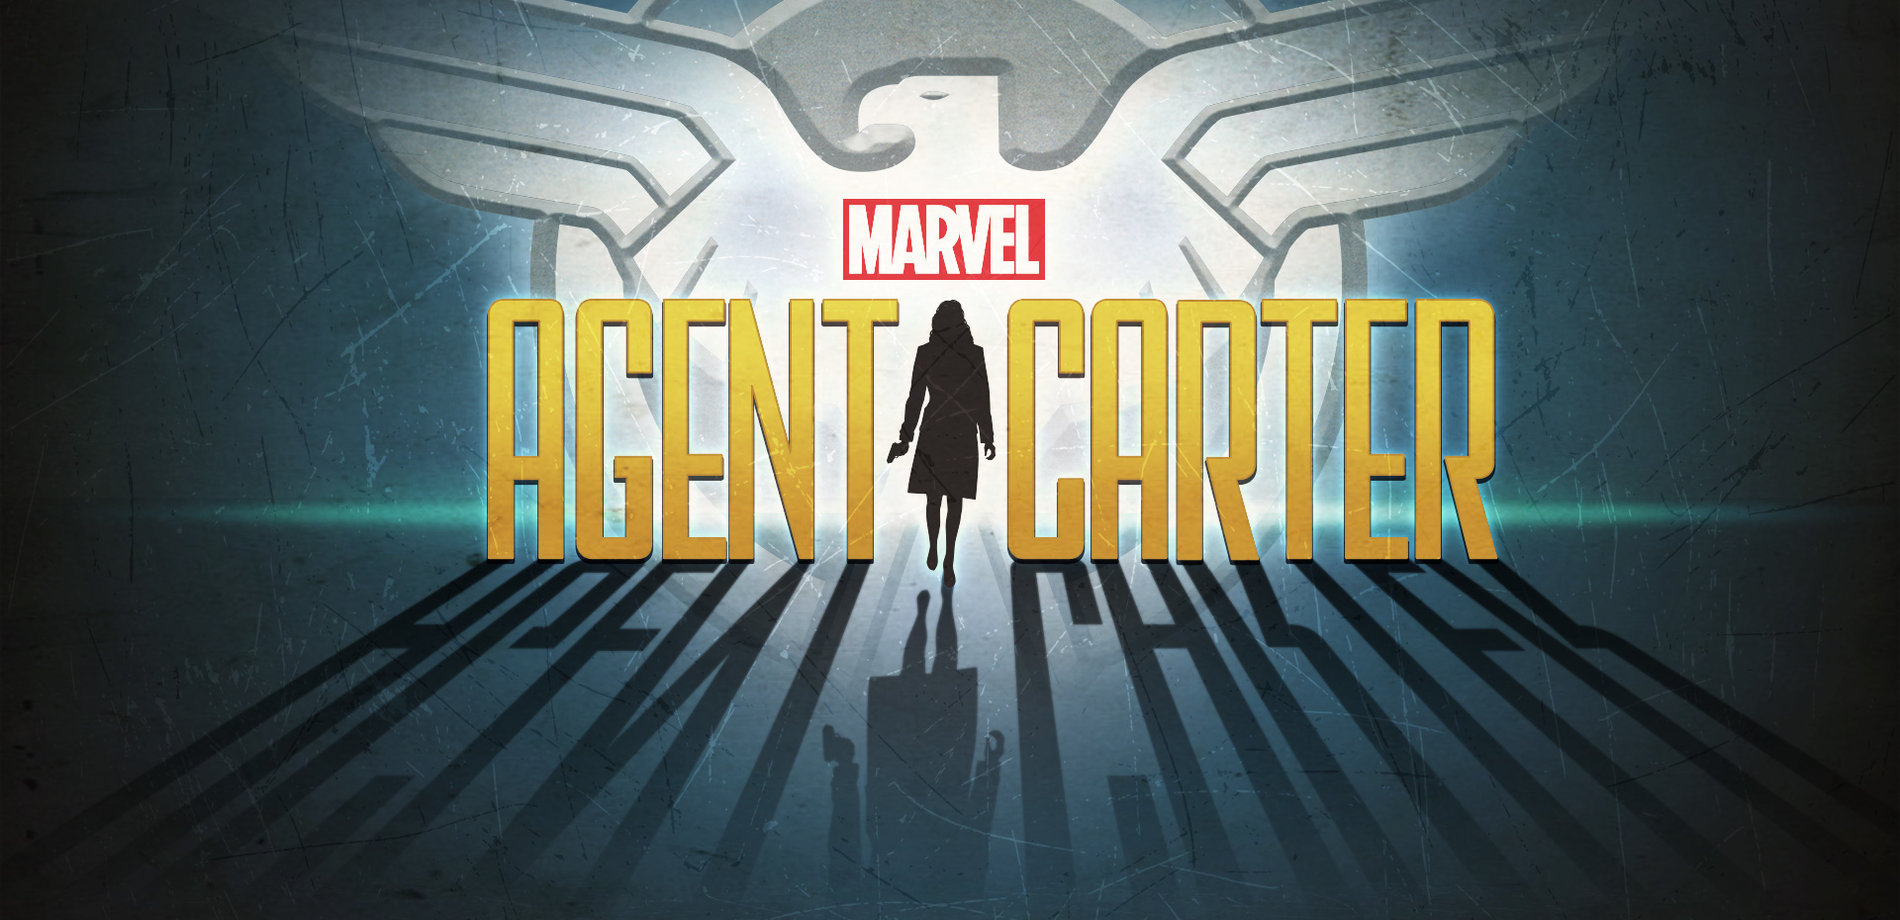 First Look At Teaser For Agent Carter Starring Hayley Atwell